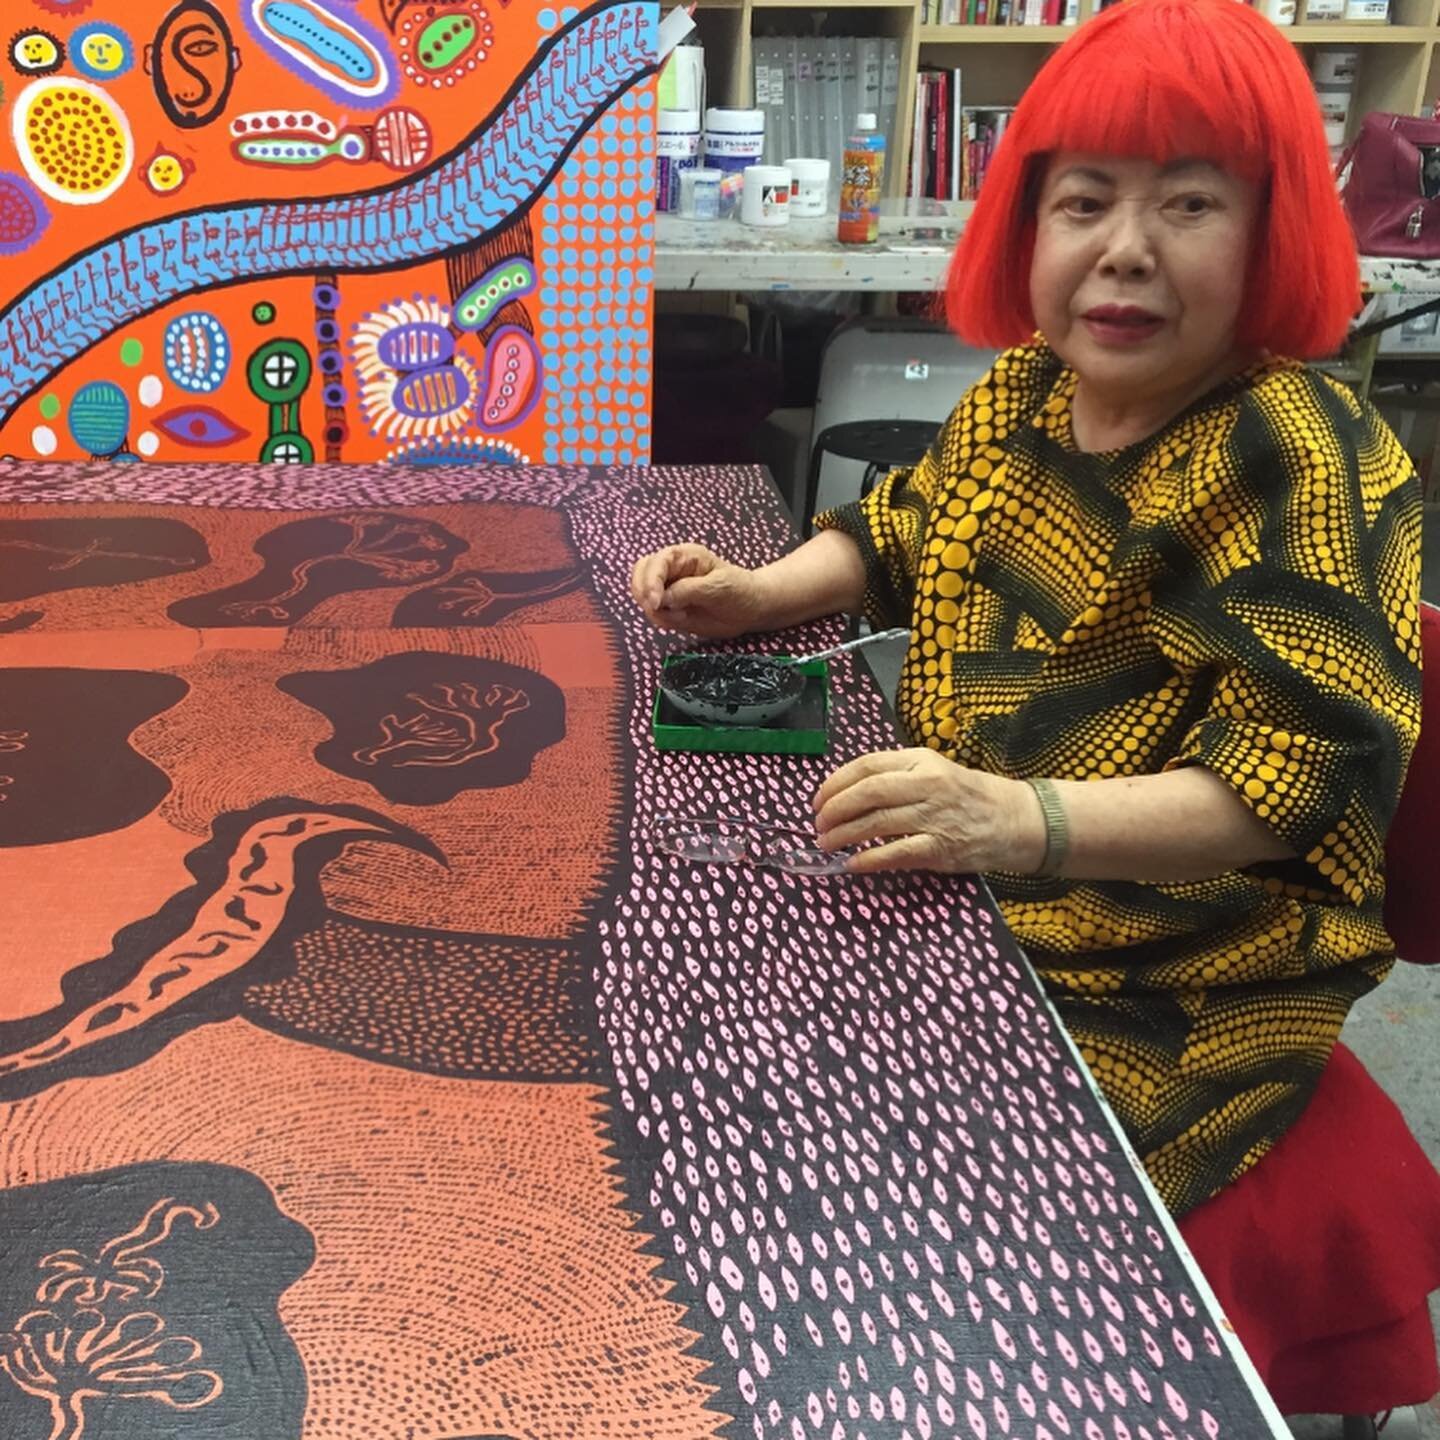 The real Kusama! My first visit to her studio in Tokyo in 2015 to invite her to create an exhibition @hirshhorn focussed on her infinity mirrored rooms. (Until then, her infinity net paintings were the main focus of interest.)&hellip;and the rest is 